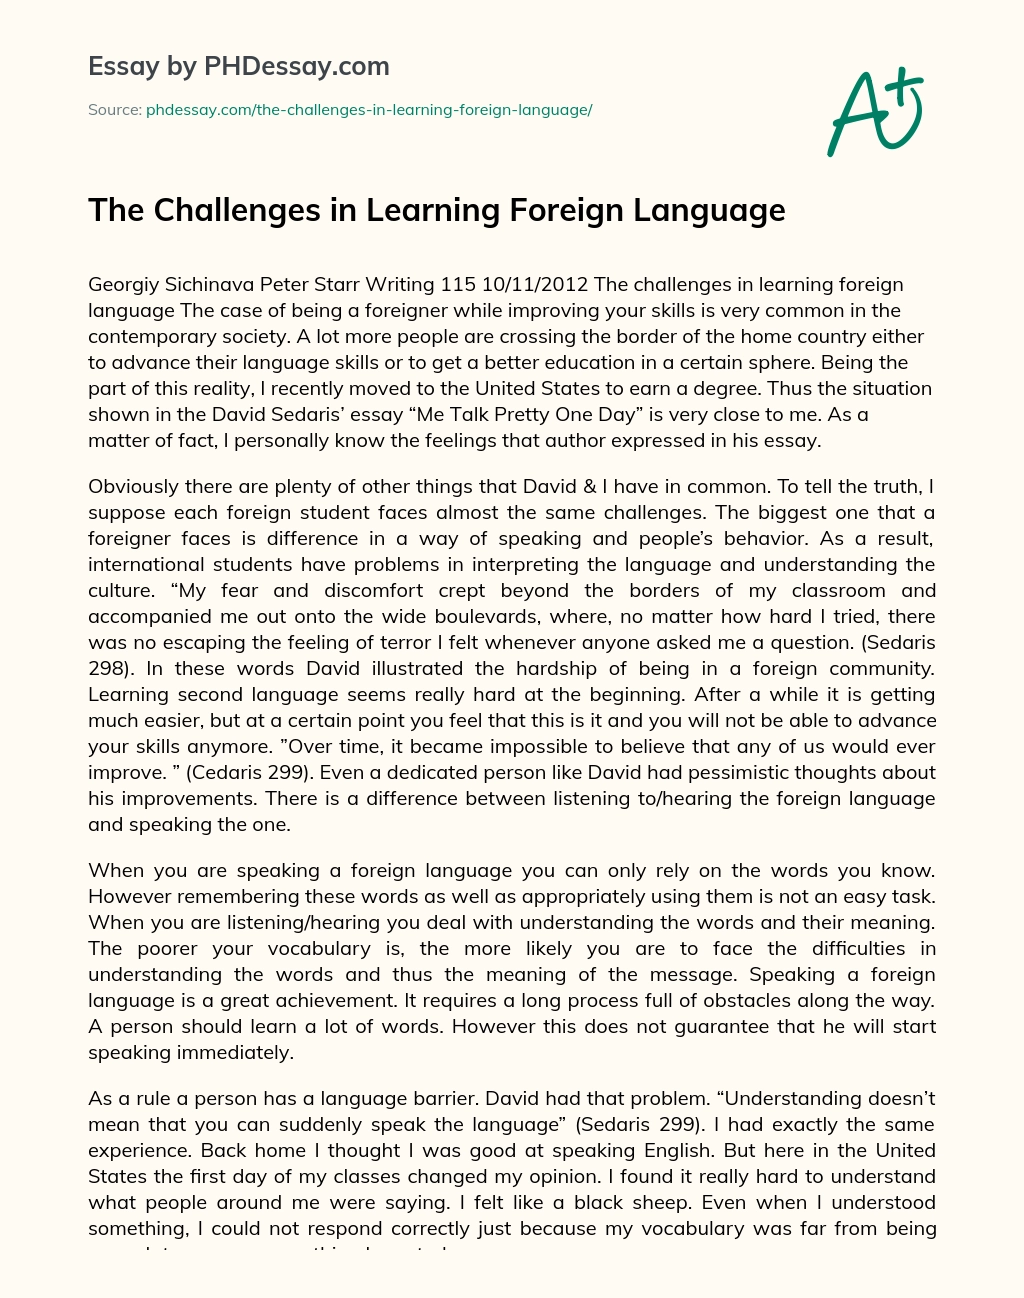 The Challenges in Learning Foreign Language essay